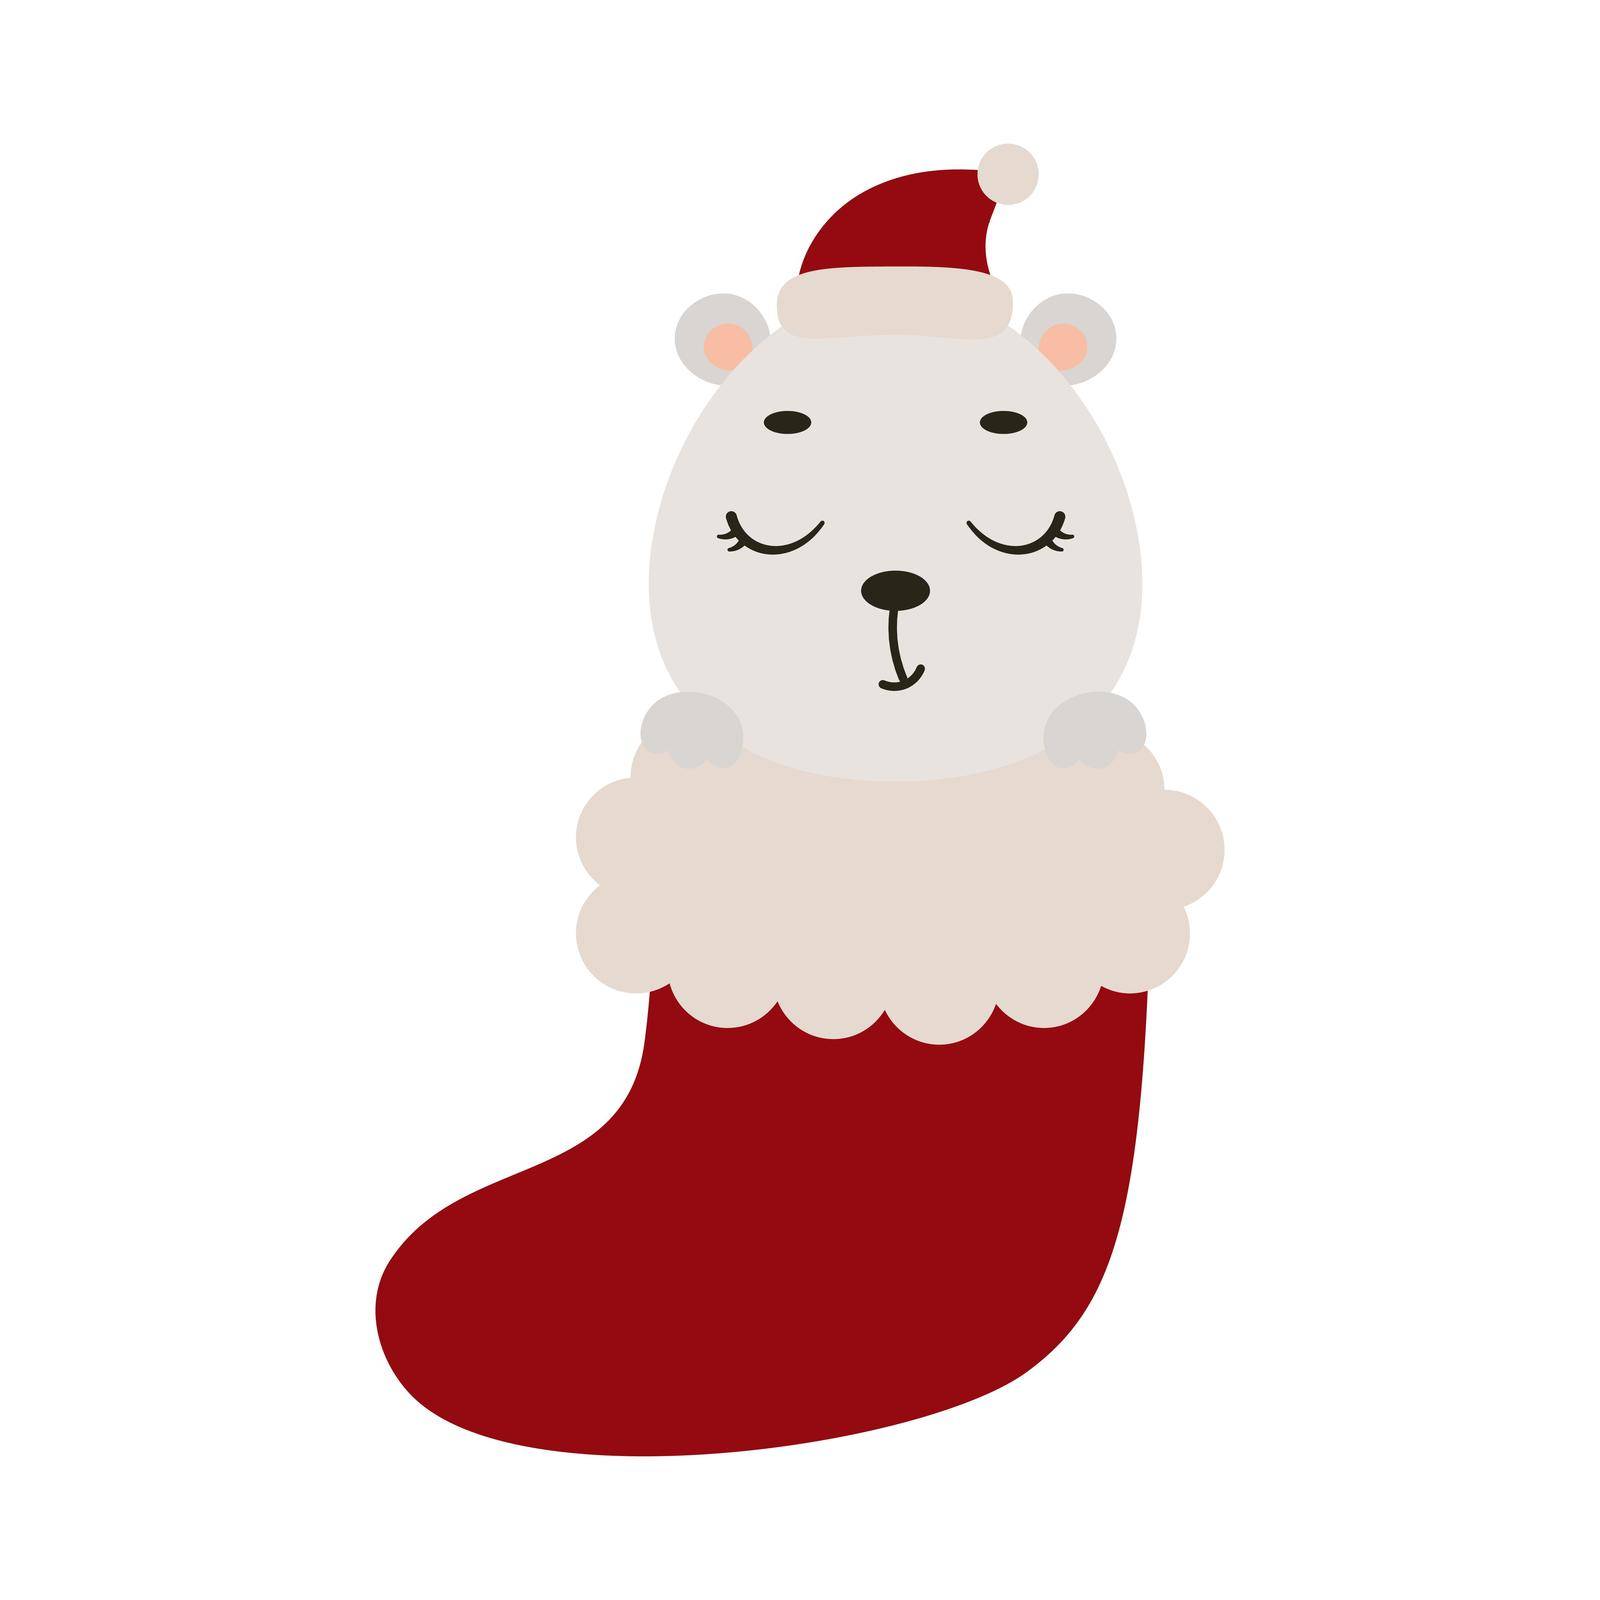 Cute little polar bear in Christmas sock. Cartoon animal character for kids cards, baby shower, invitation, poster, t-shirt composition, house interior. Vector stock illustration.